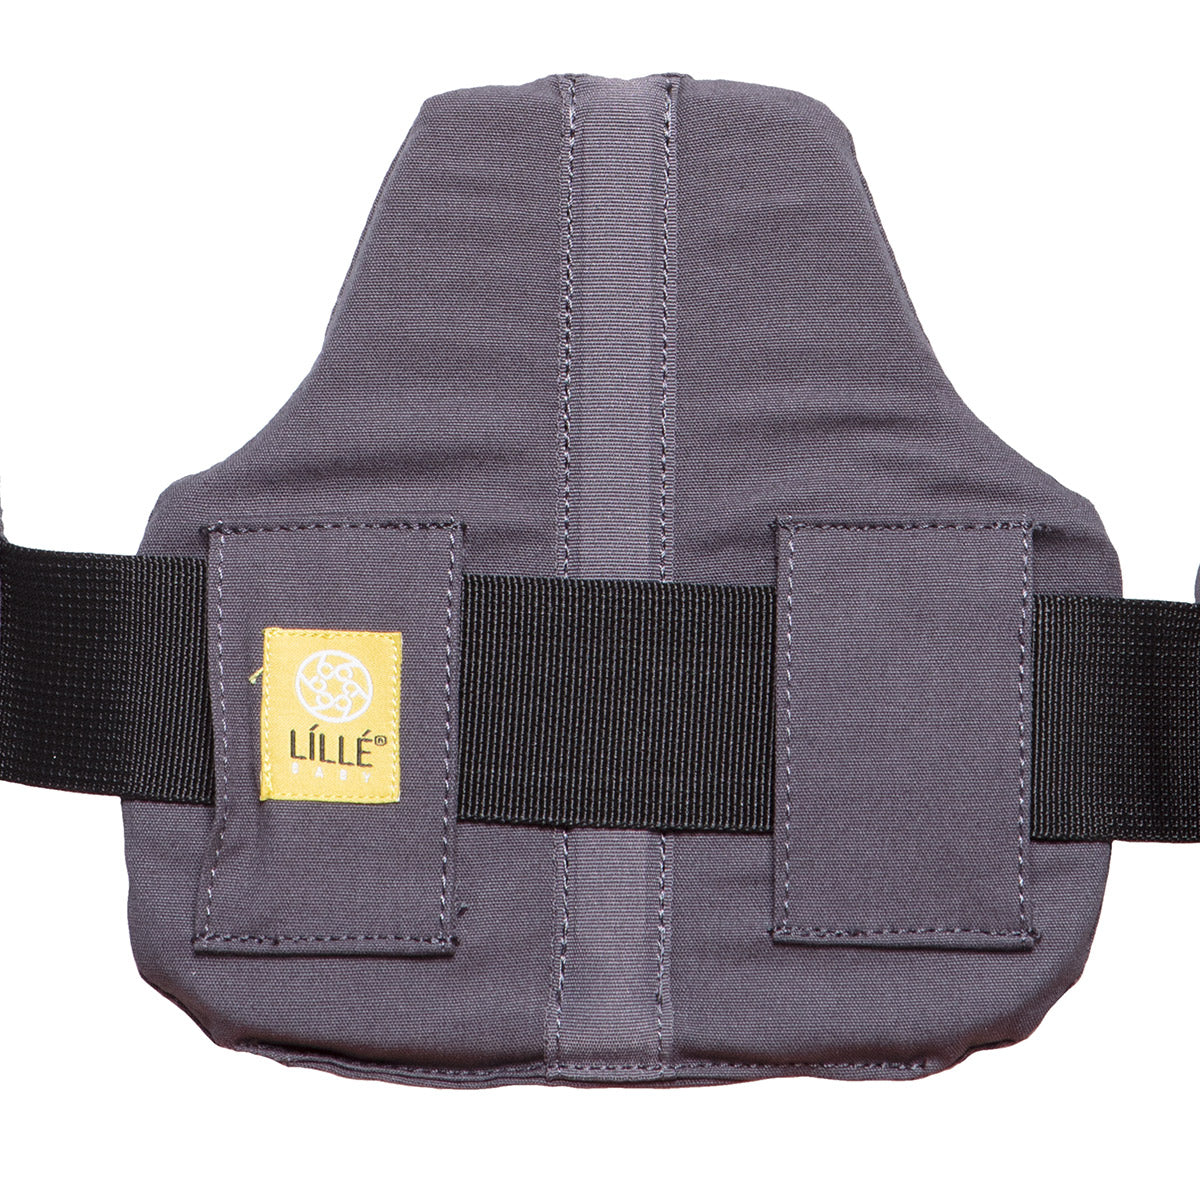 lumbar support in charcoal silver